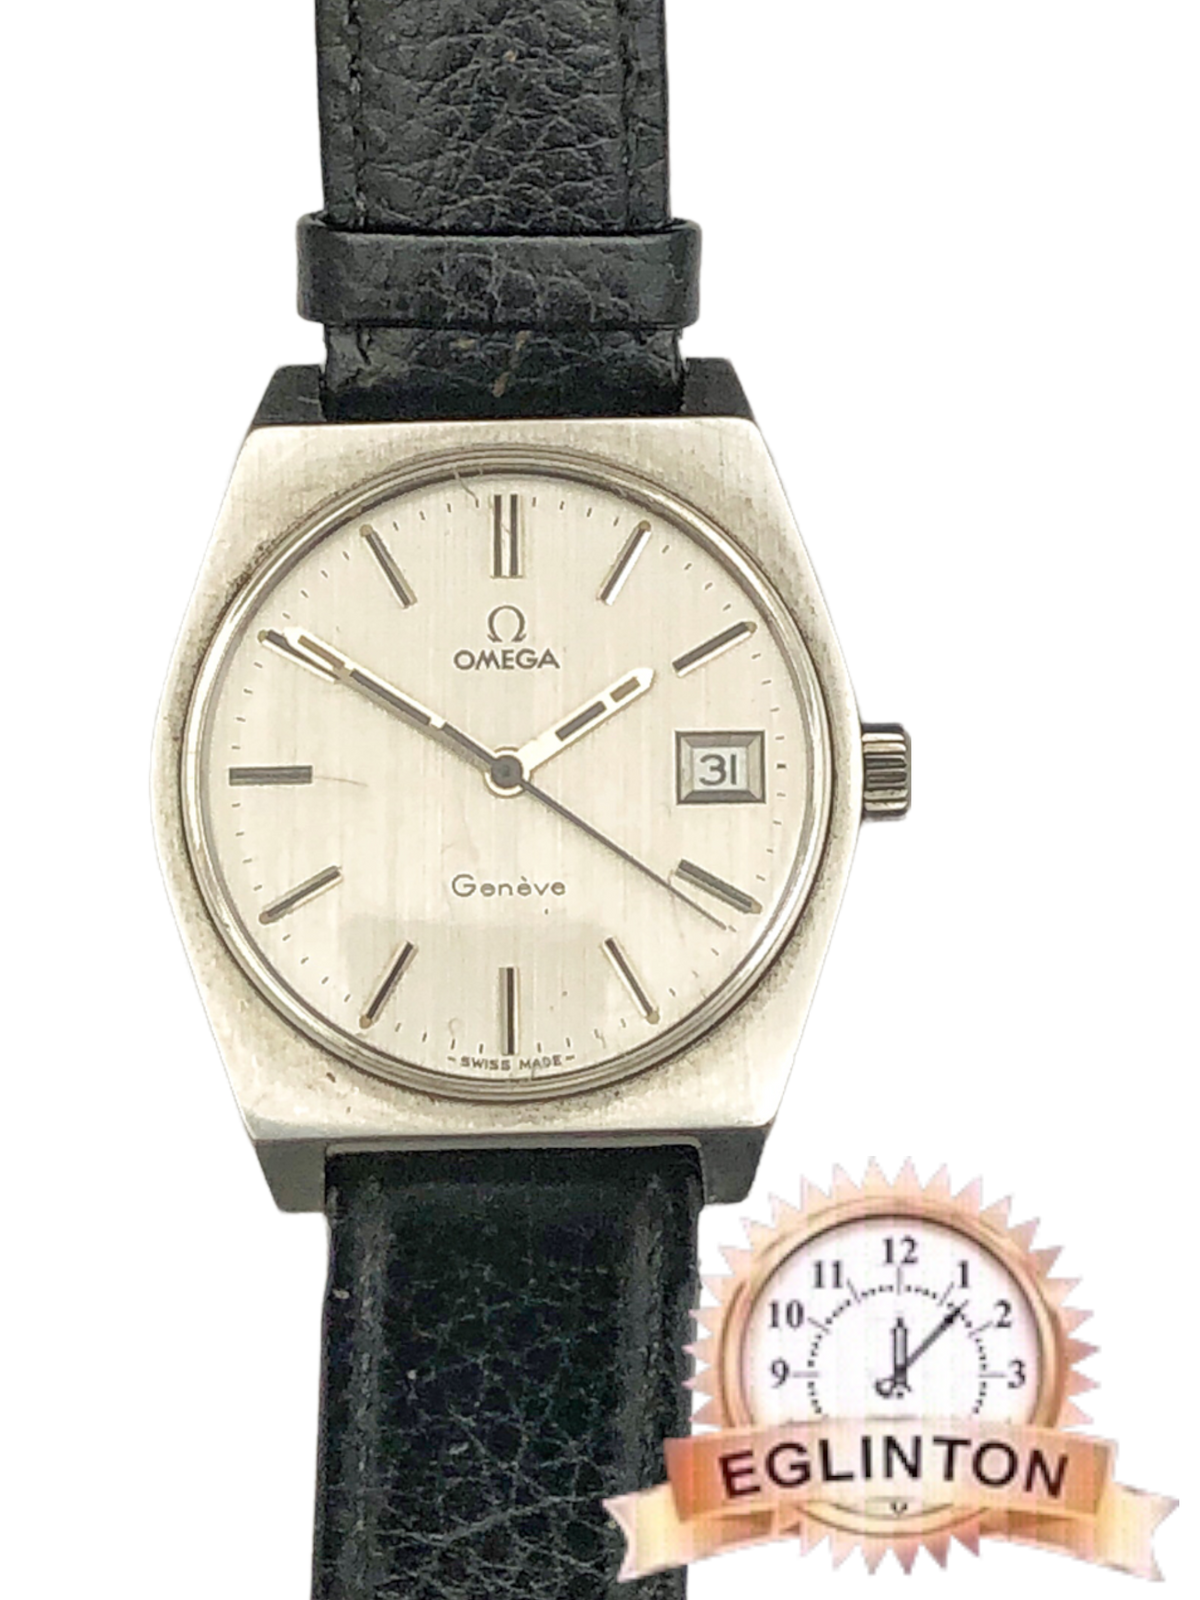 Omega Geneve - Silver Brushed Satin Dial with Date - Tonneau Case - c.1970's - Model ref: 136.0049 - Johny Watches